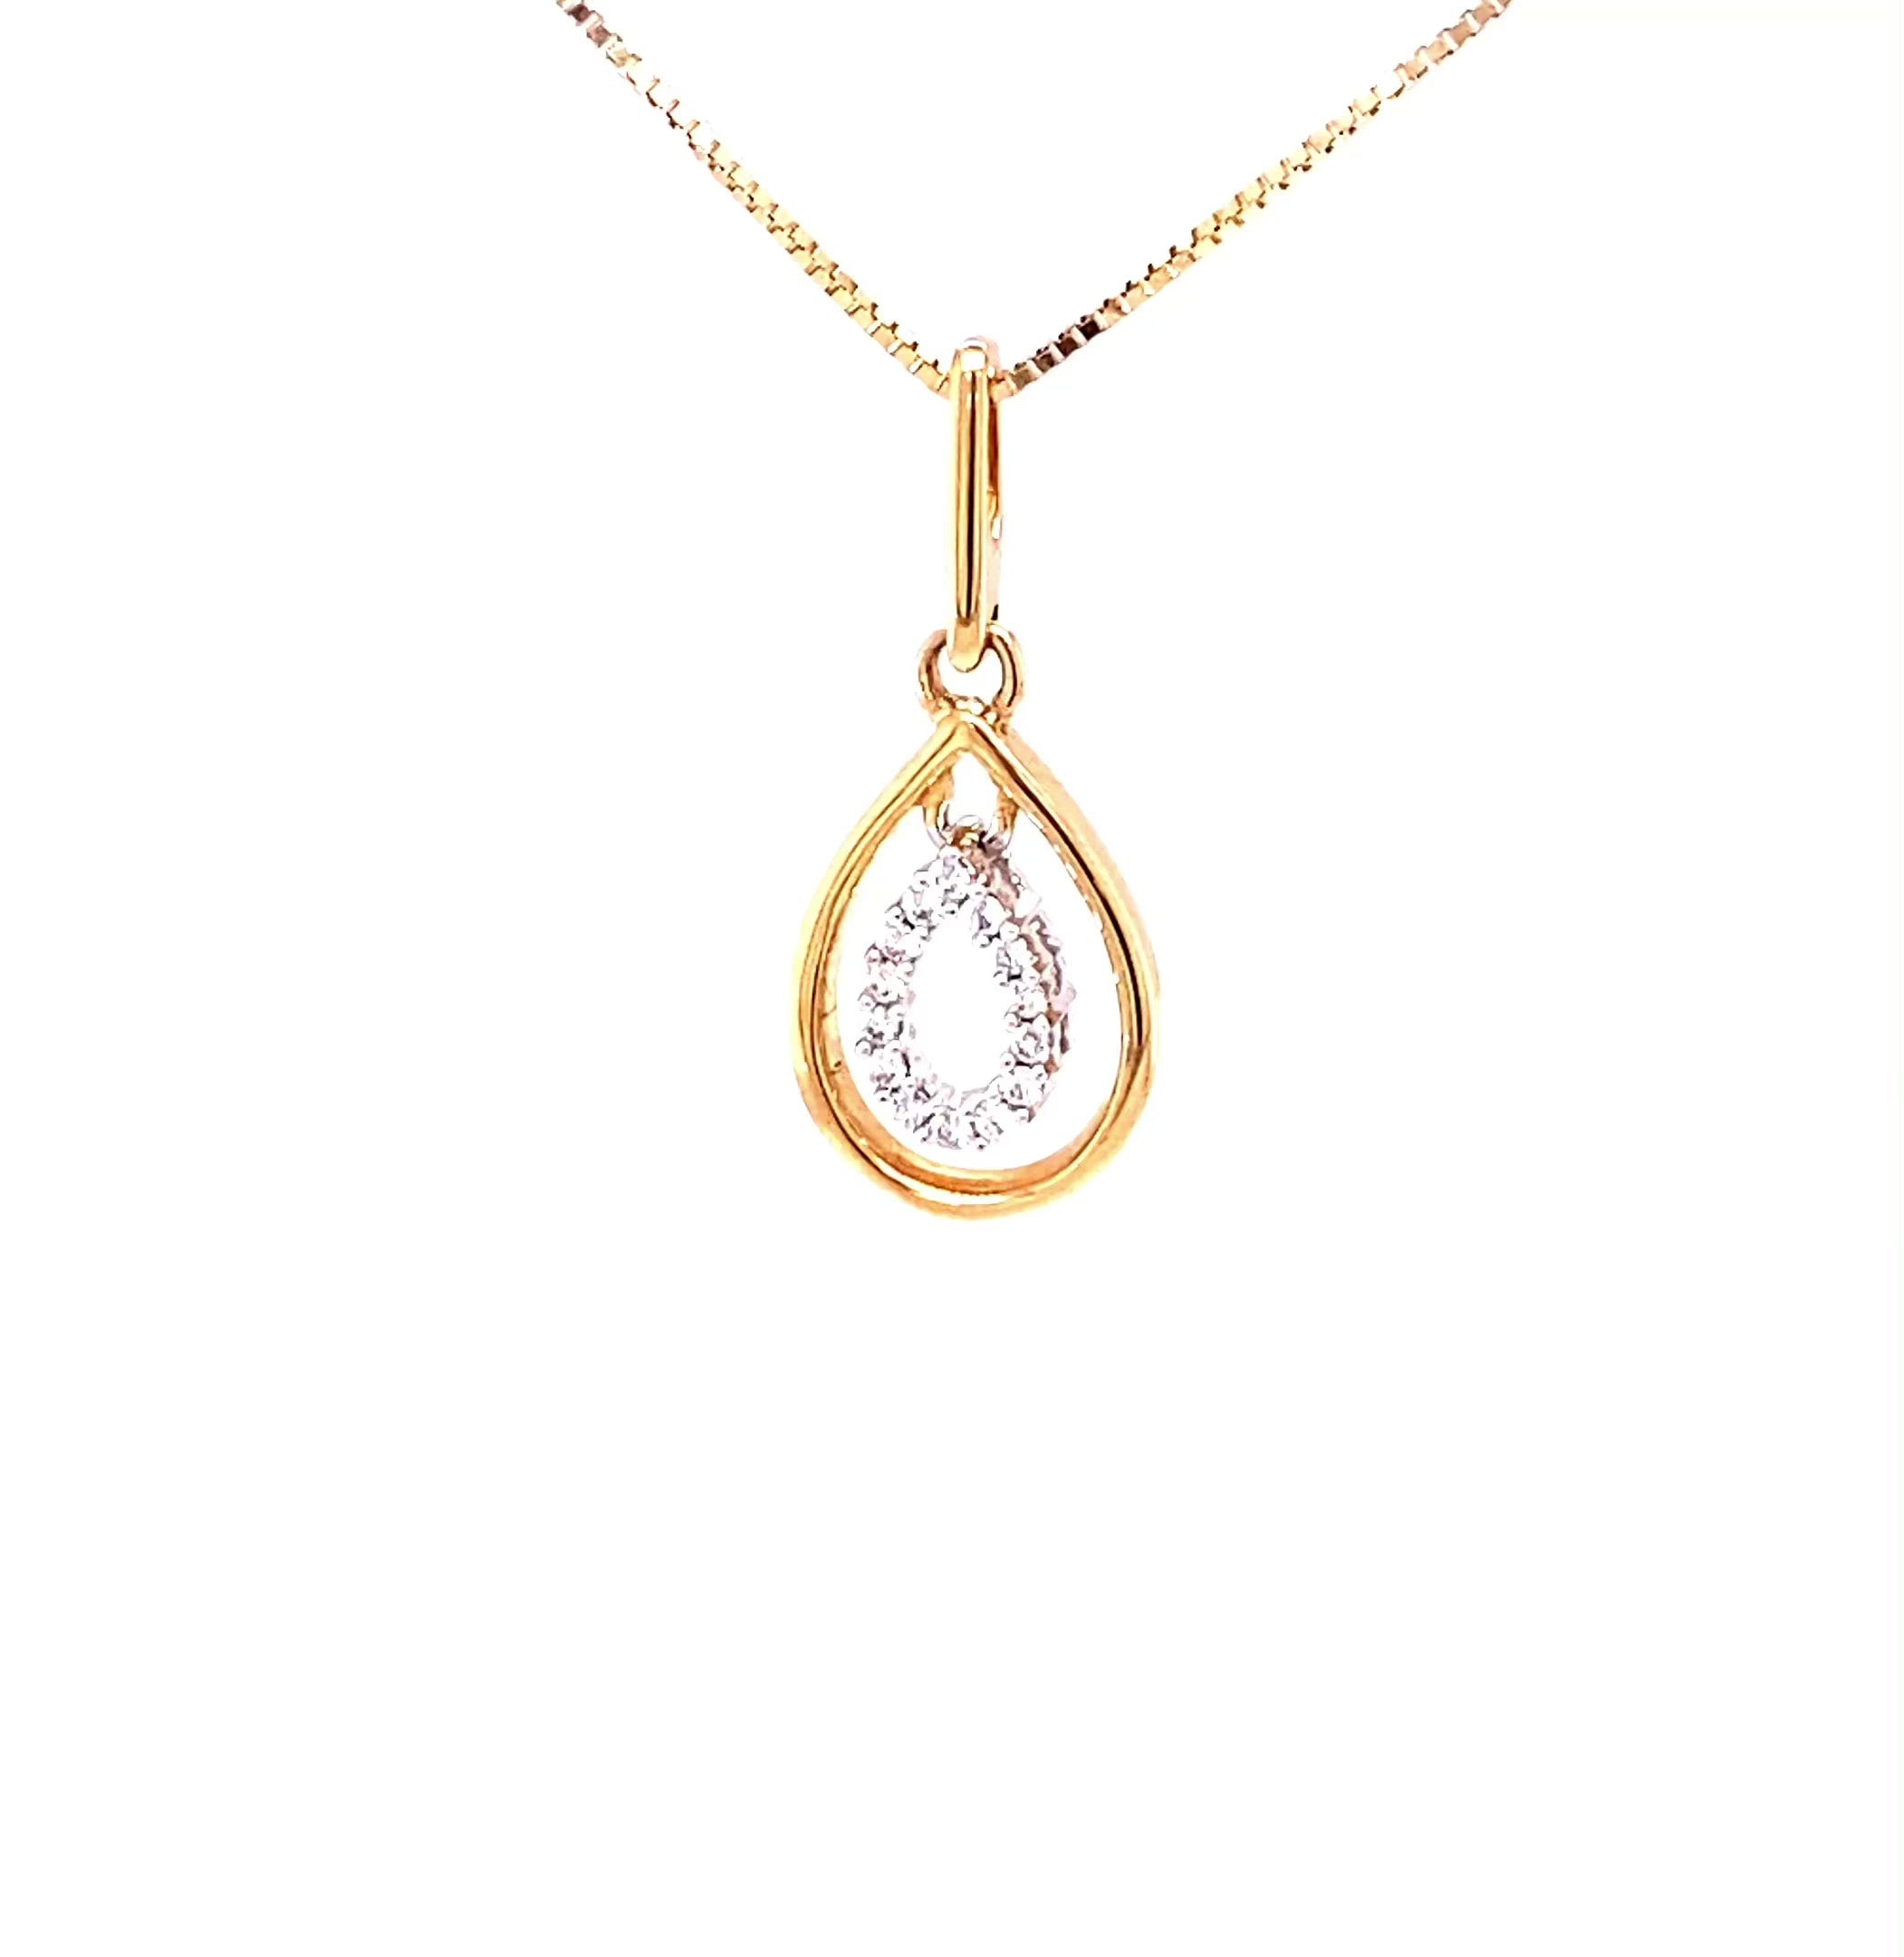 Natural Diamond Necklace 14K Solid Gold .14tcw Pave Pendant Necklace Statement Necklace Diamond Pendant Estate Jewelry Fine Women's Necklace